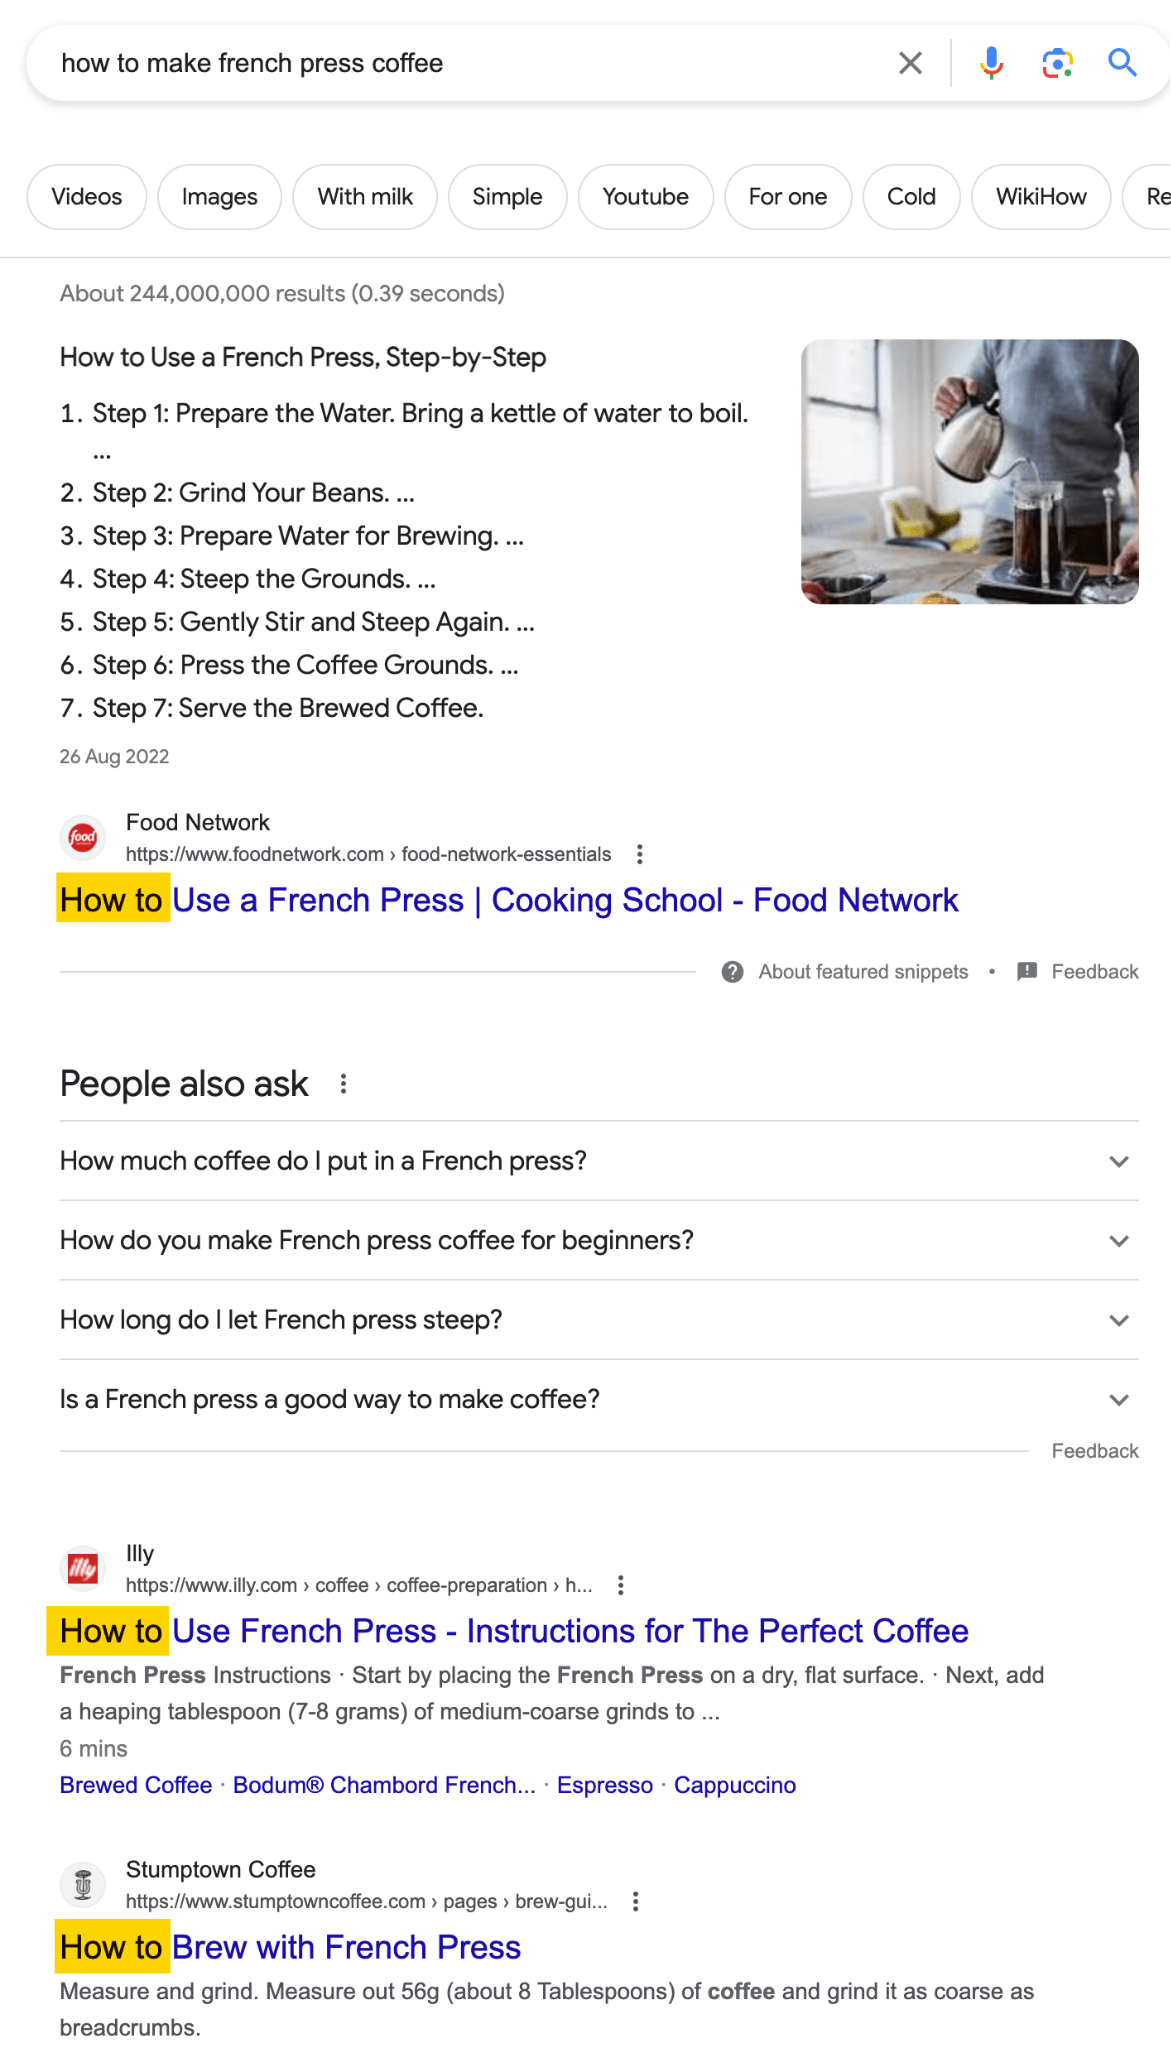 Google search results for "how to make french press coffee" shows searchers want a how-to guide